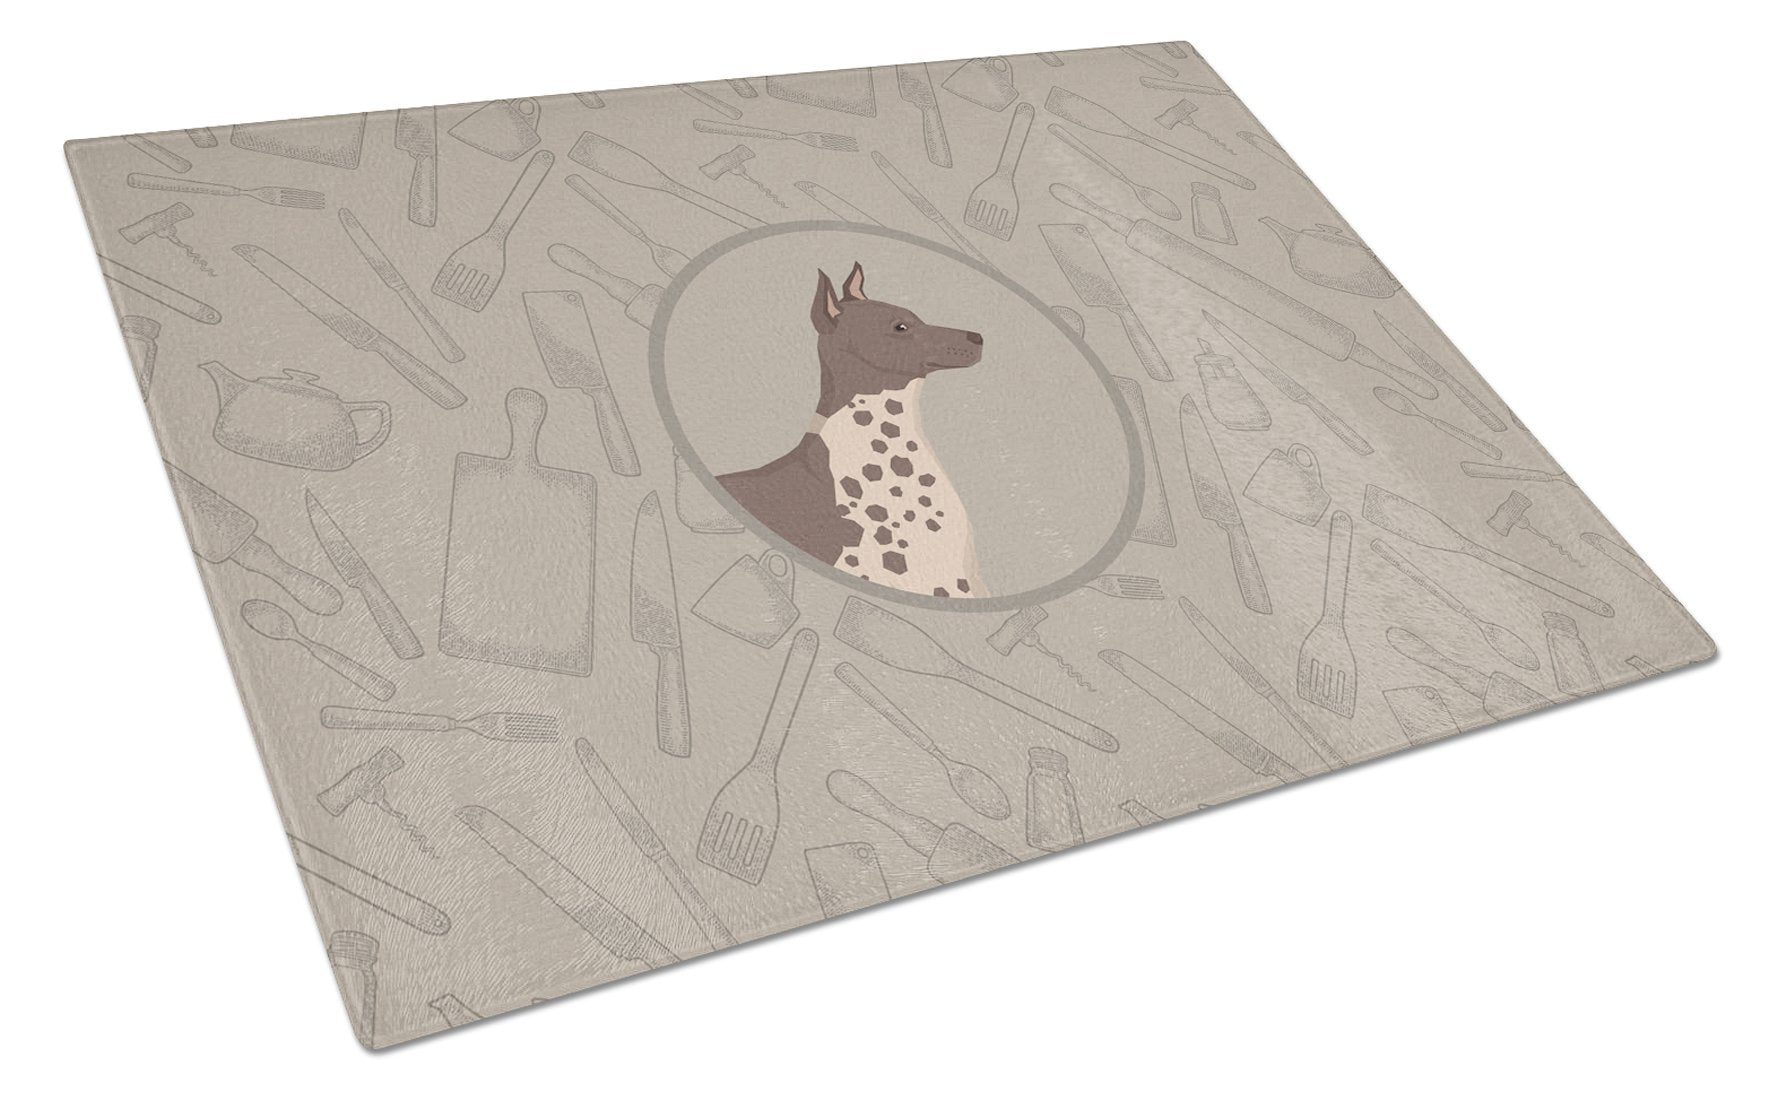 American Hairless Terrier In the Kitchen Glass Cutting Board Large CK2161LCB by Caroline's Treasures